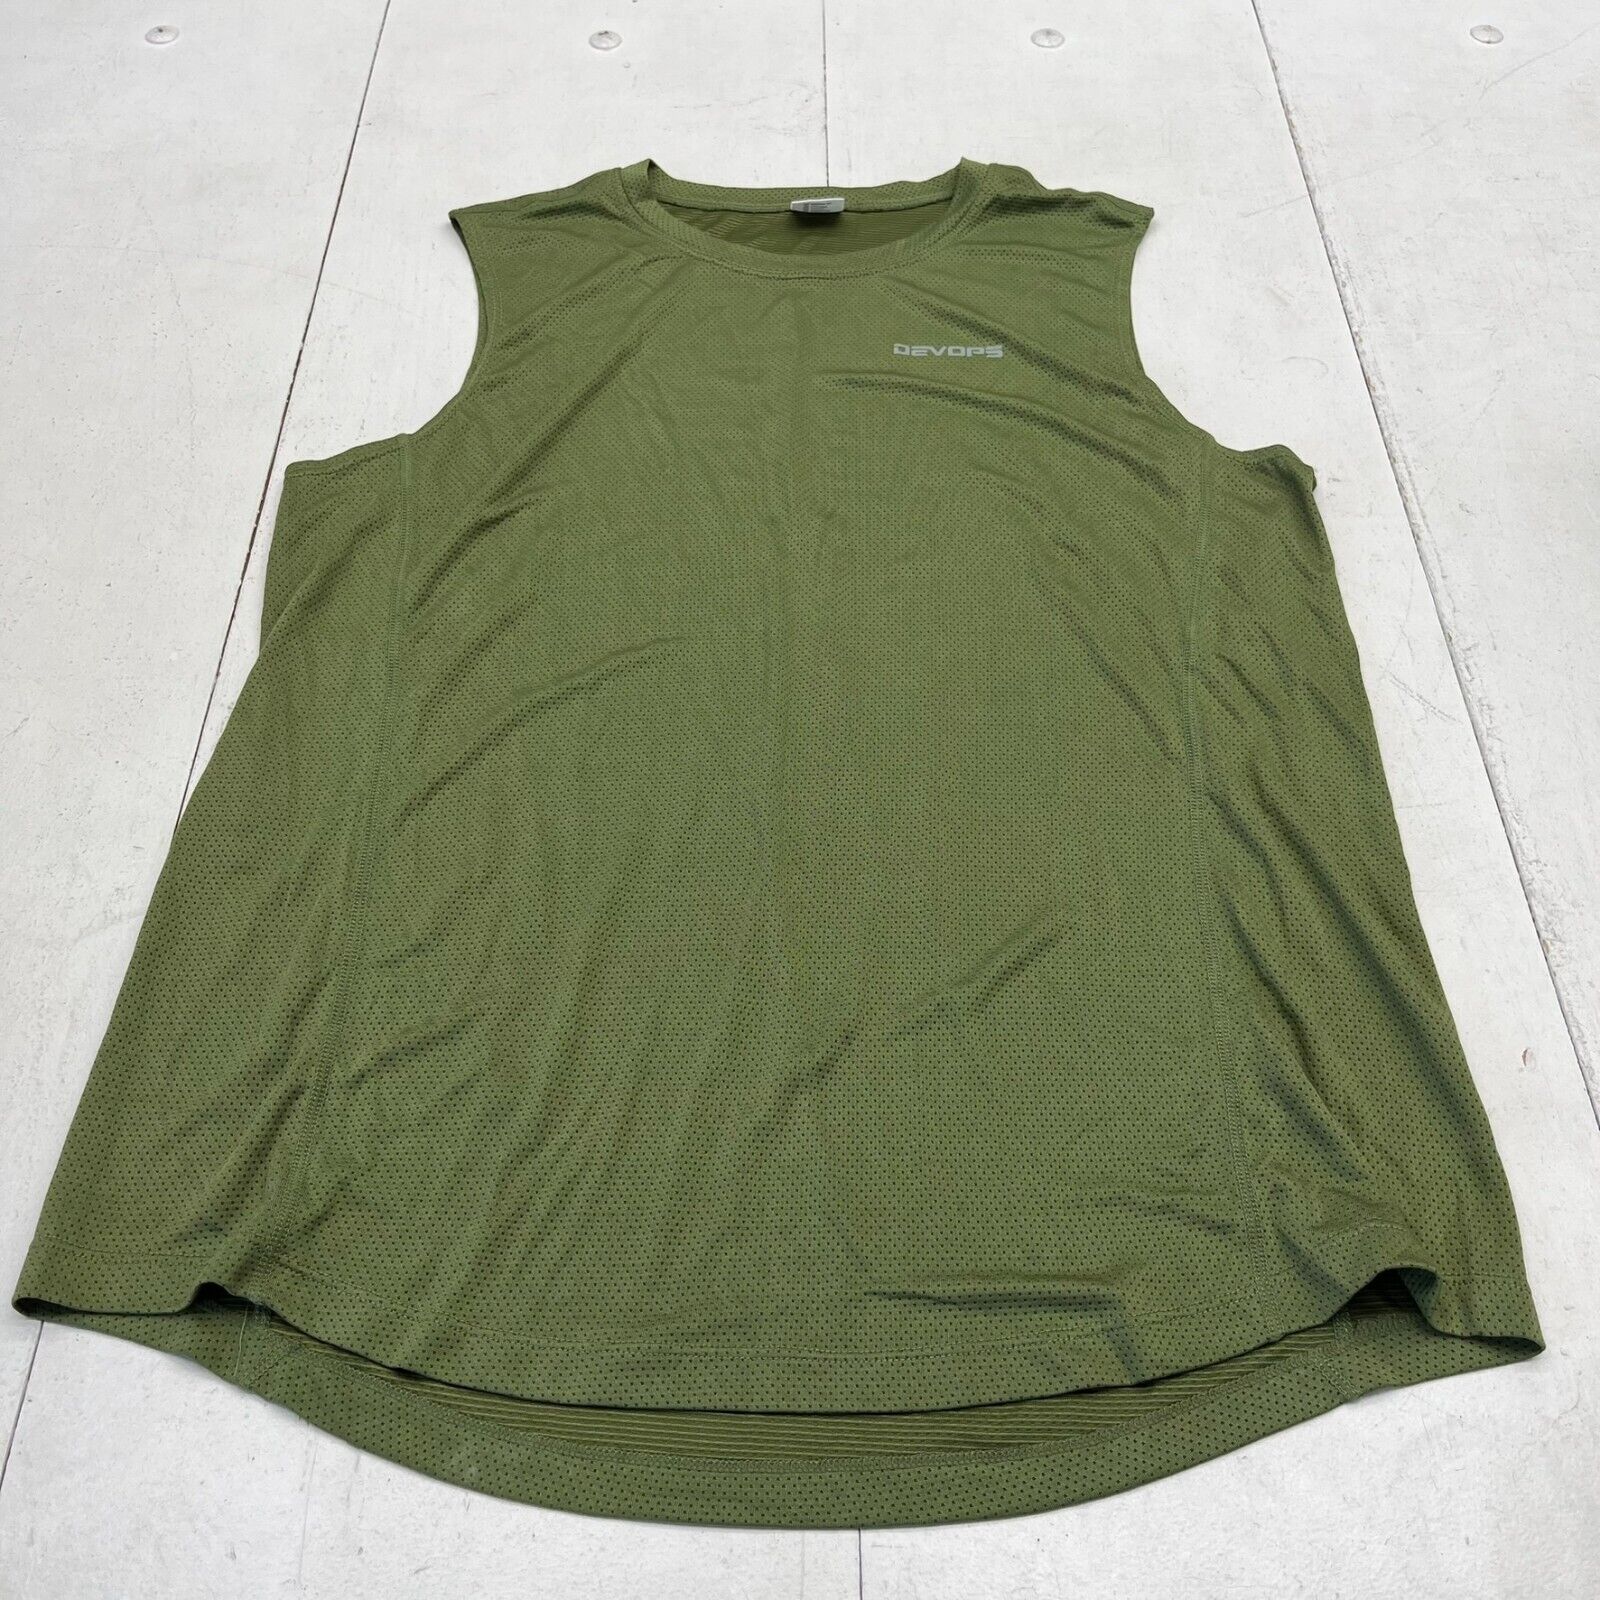 Devops Olive Green Breathable Athletic Tank Top Mens Size Large NEW